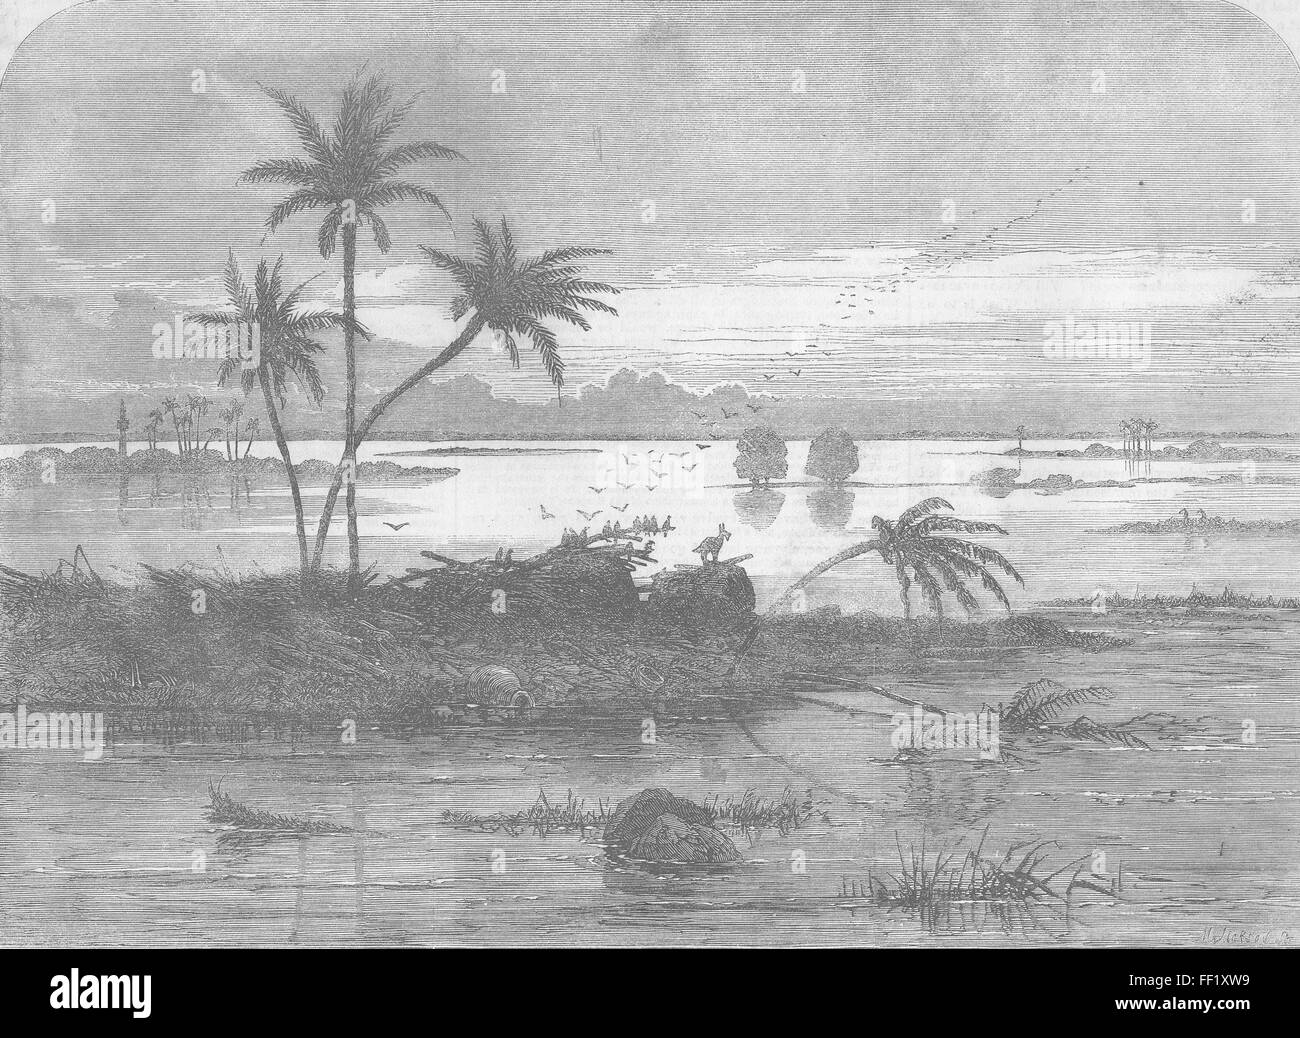 EGYPT Village nr Tautah, destroyed by Nile flood 1863. Illustrated London News Stock Photo